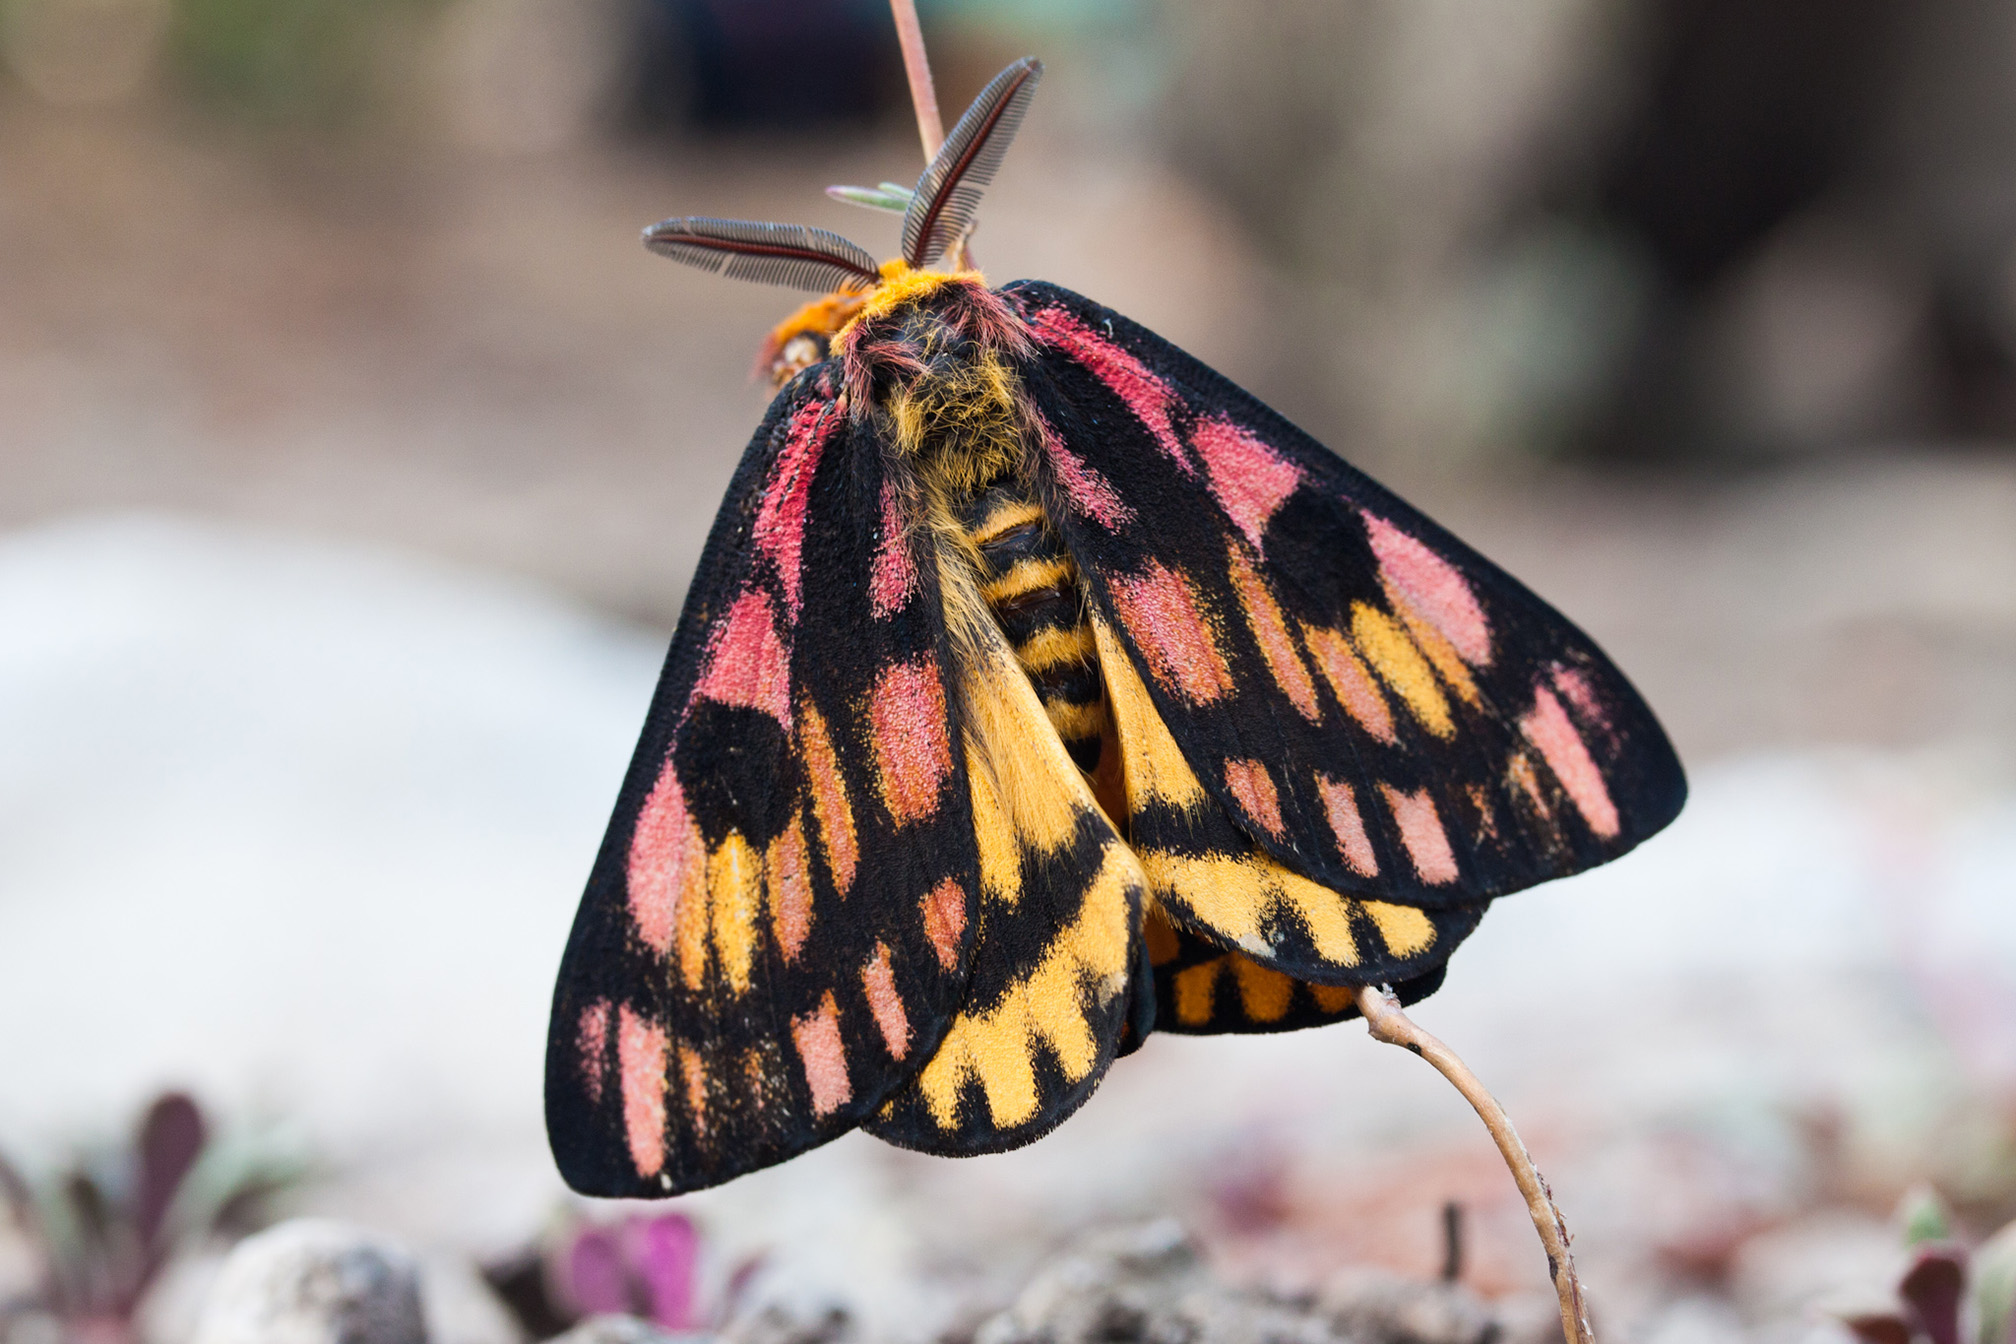 A large moth rests on a brown stem. The moth has pink and yellow wings that are patterned with bold black markings.